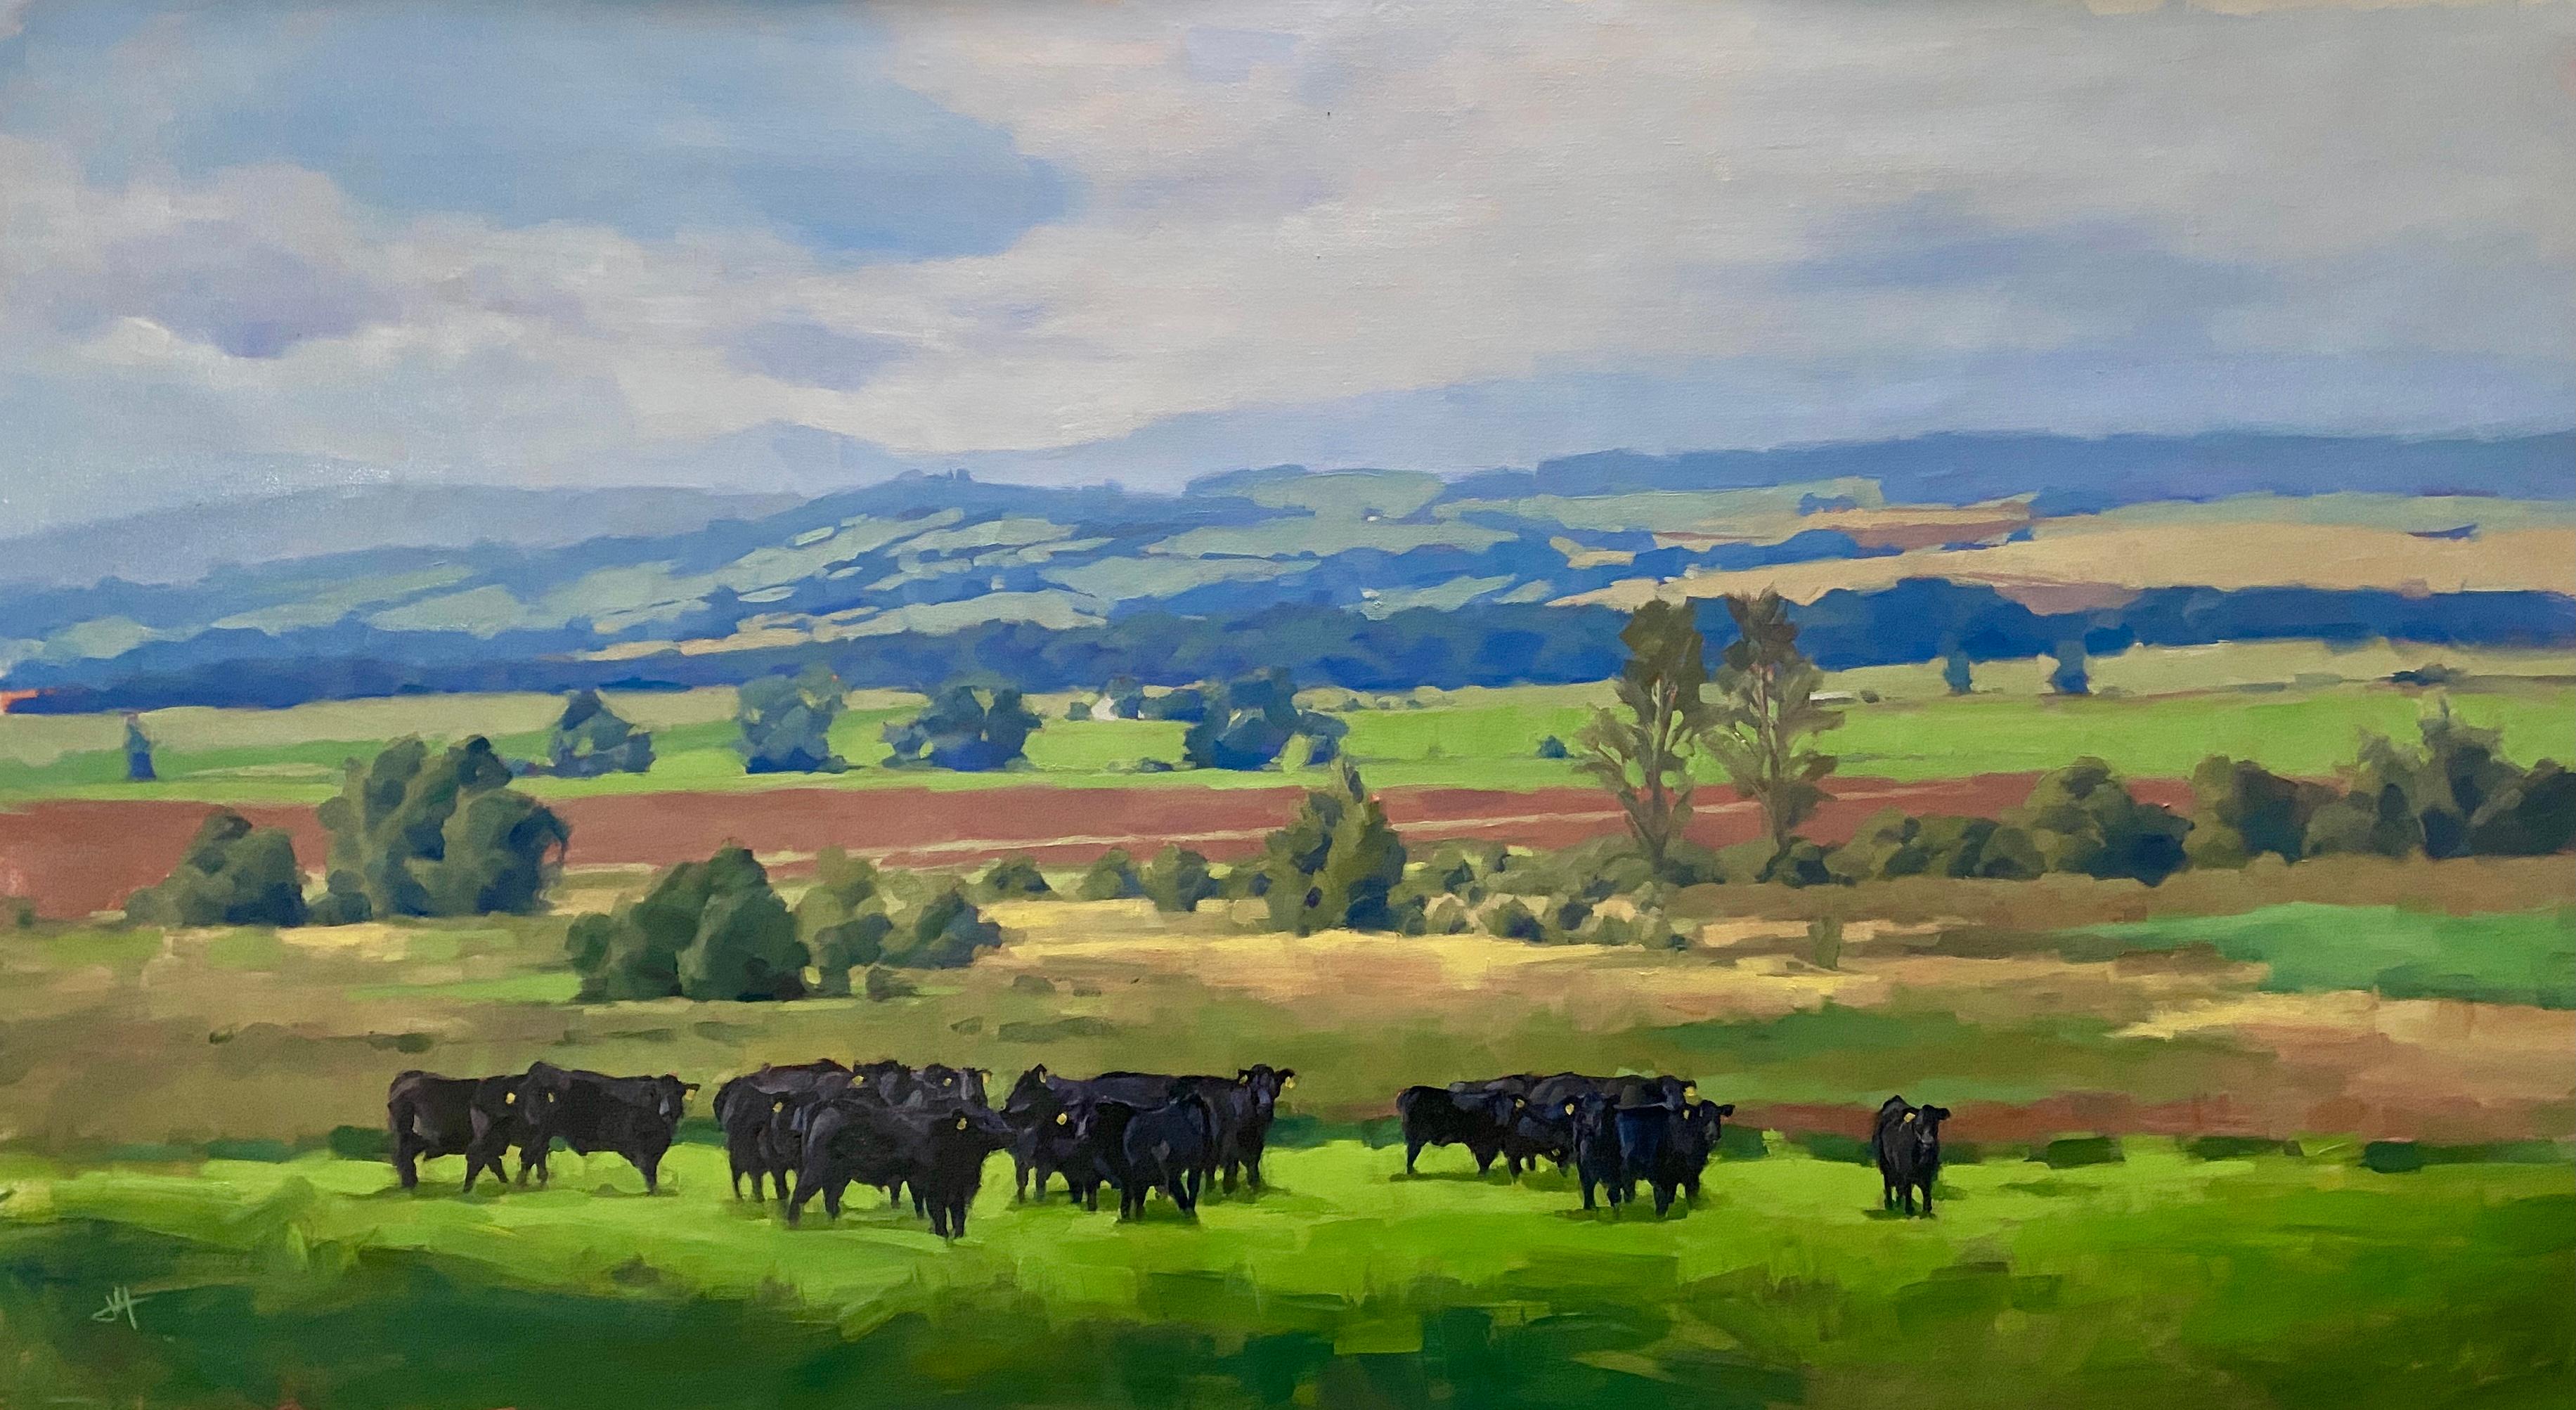 Judd Mercer Landscape Painting - "Local Residents, " Oil painting